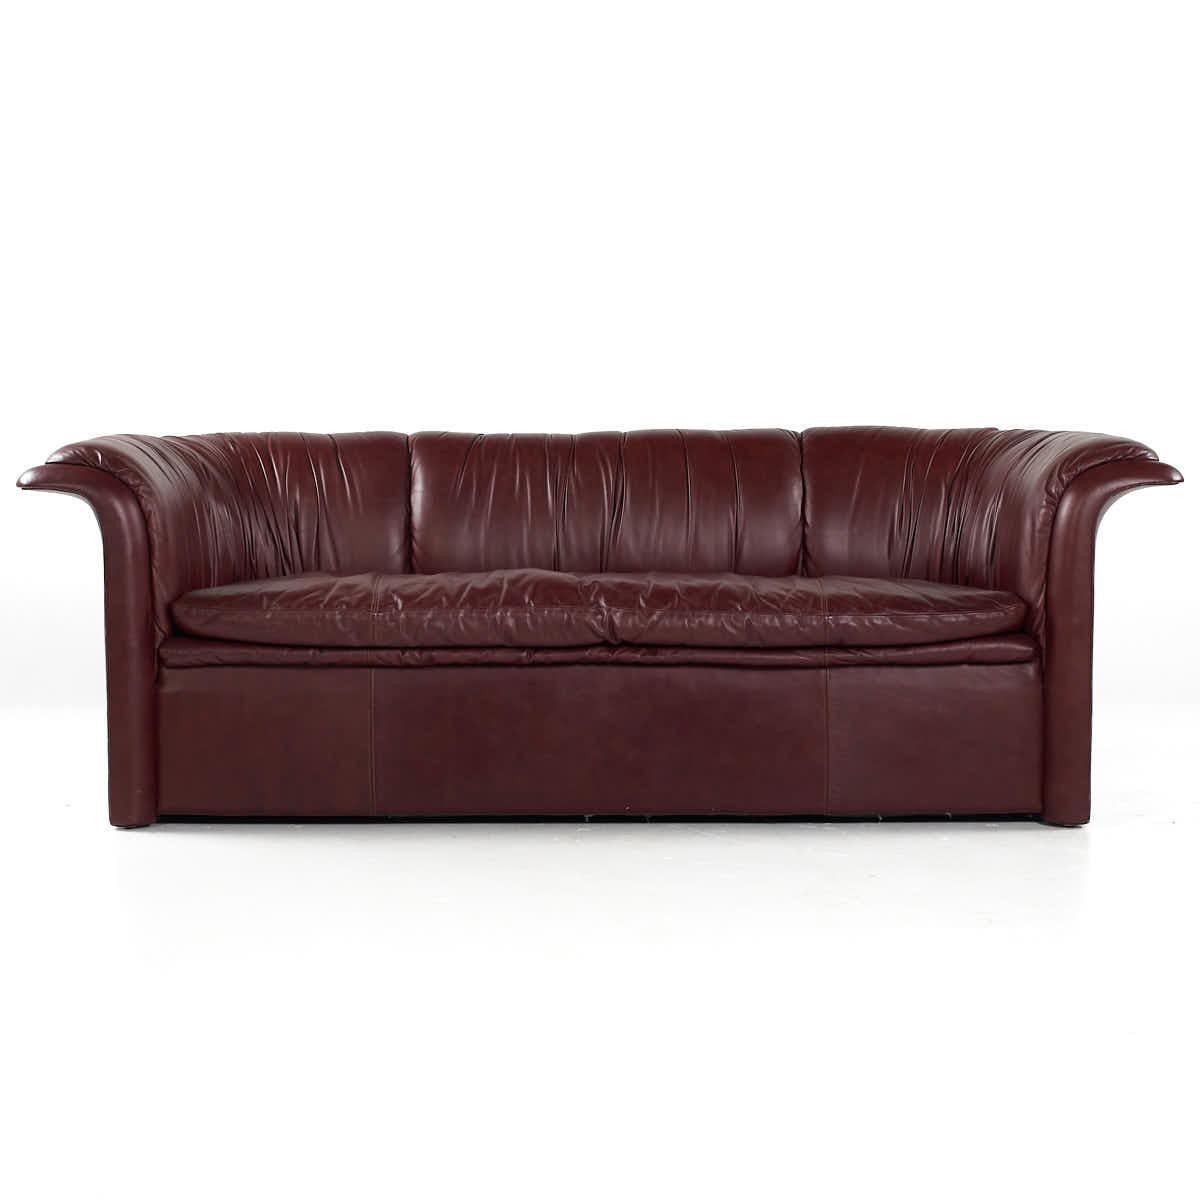 Dennis Christiansen for Dunbar Mid Century Leather Sofa

This sofa measures: 76 wide x 35 deep x 25.5 inches high, with a seat height of 16 inches

All pieces of furniture can be had in what we call restored vintage condition. That means the piece